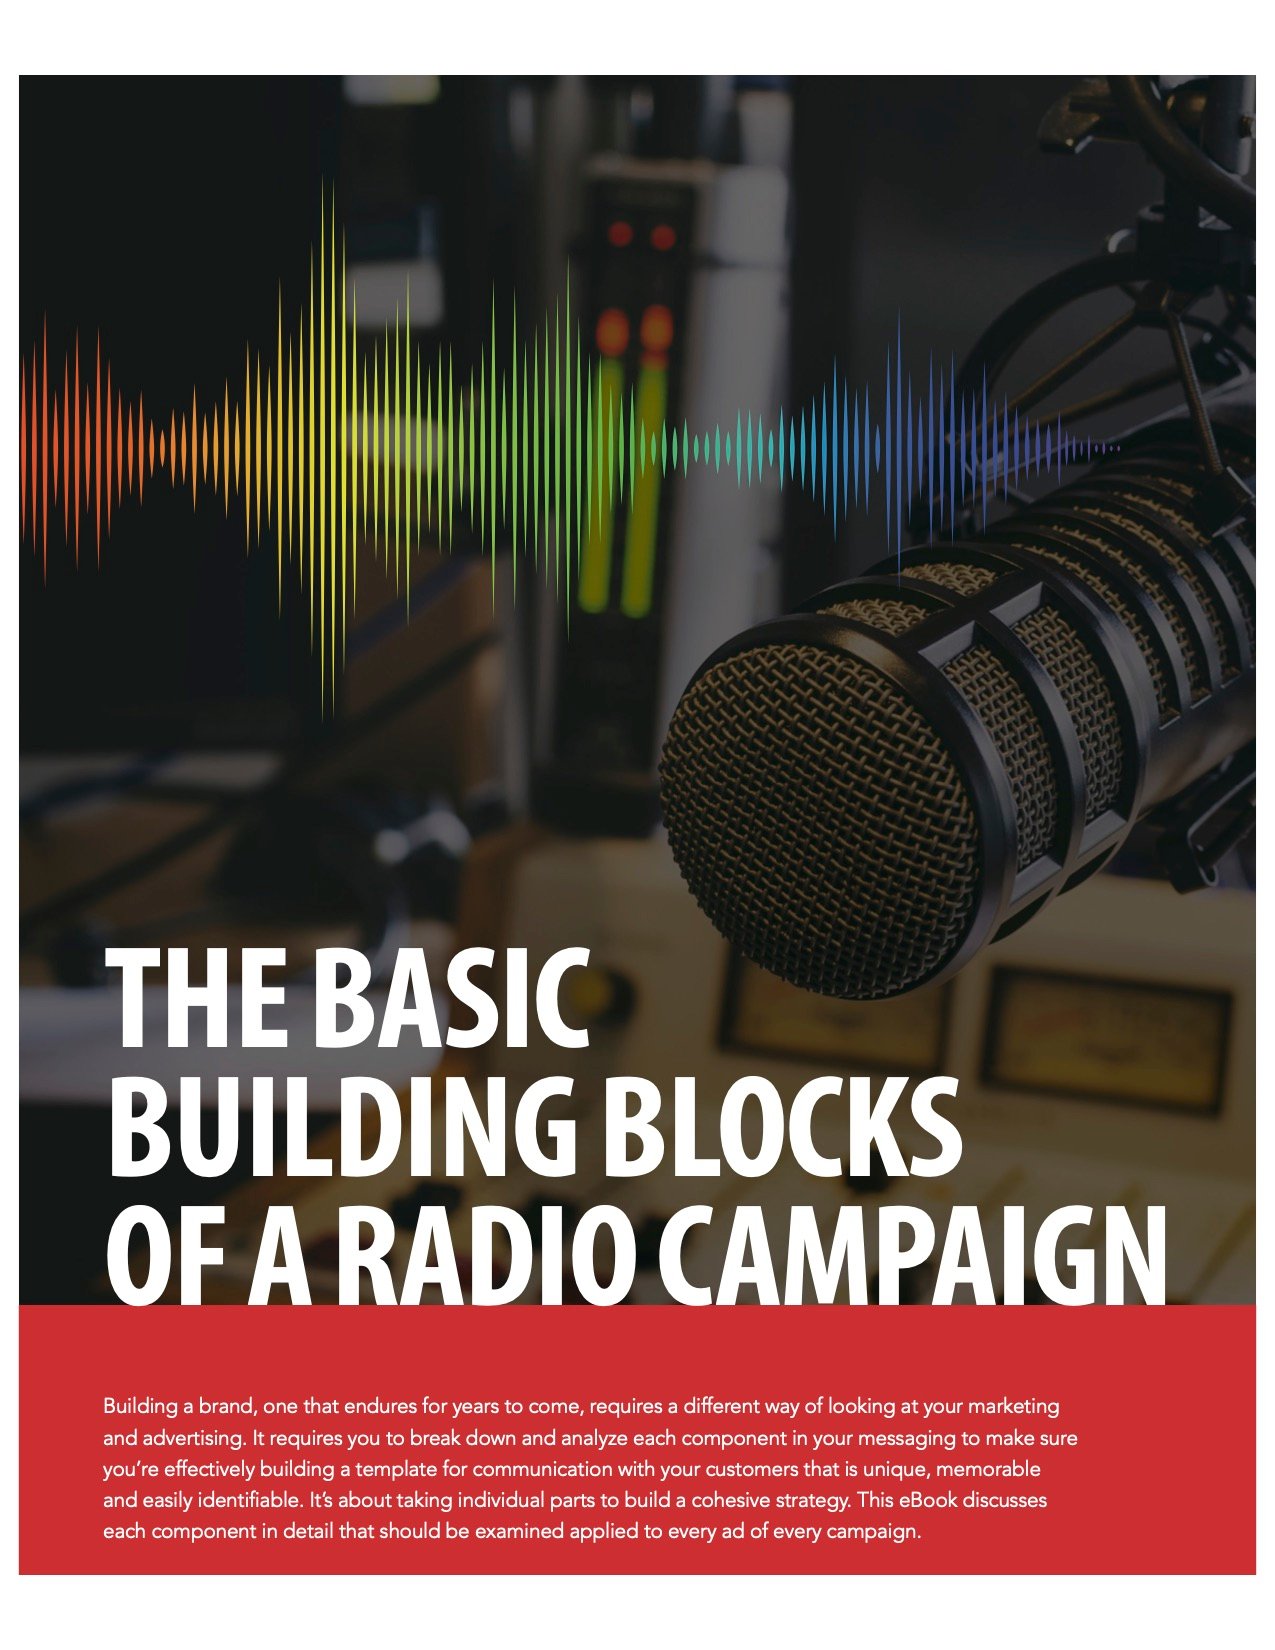 The Basic Building Blocks of a Radio Campaign